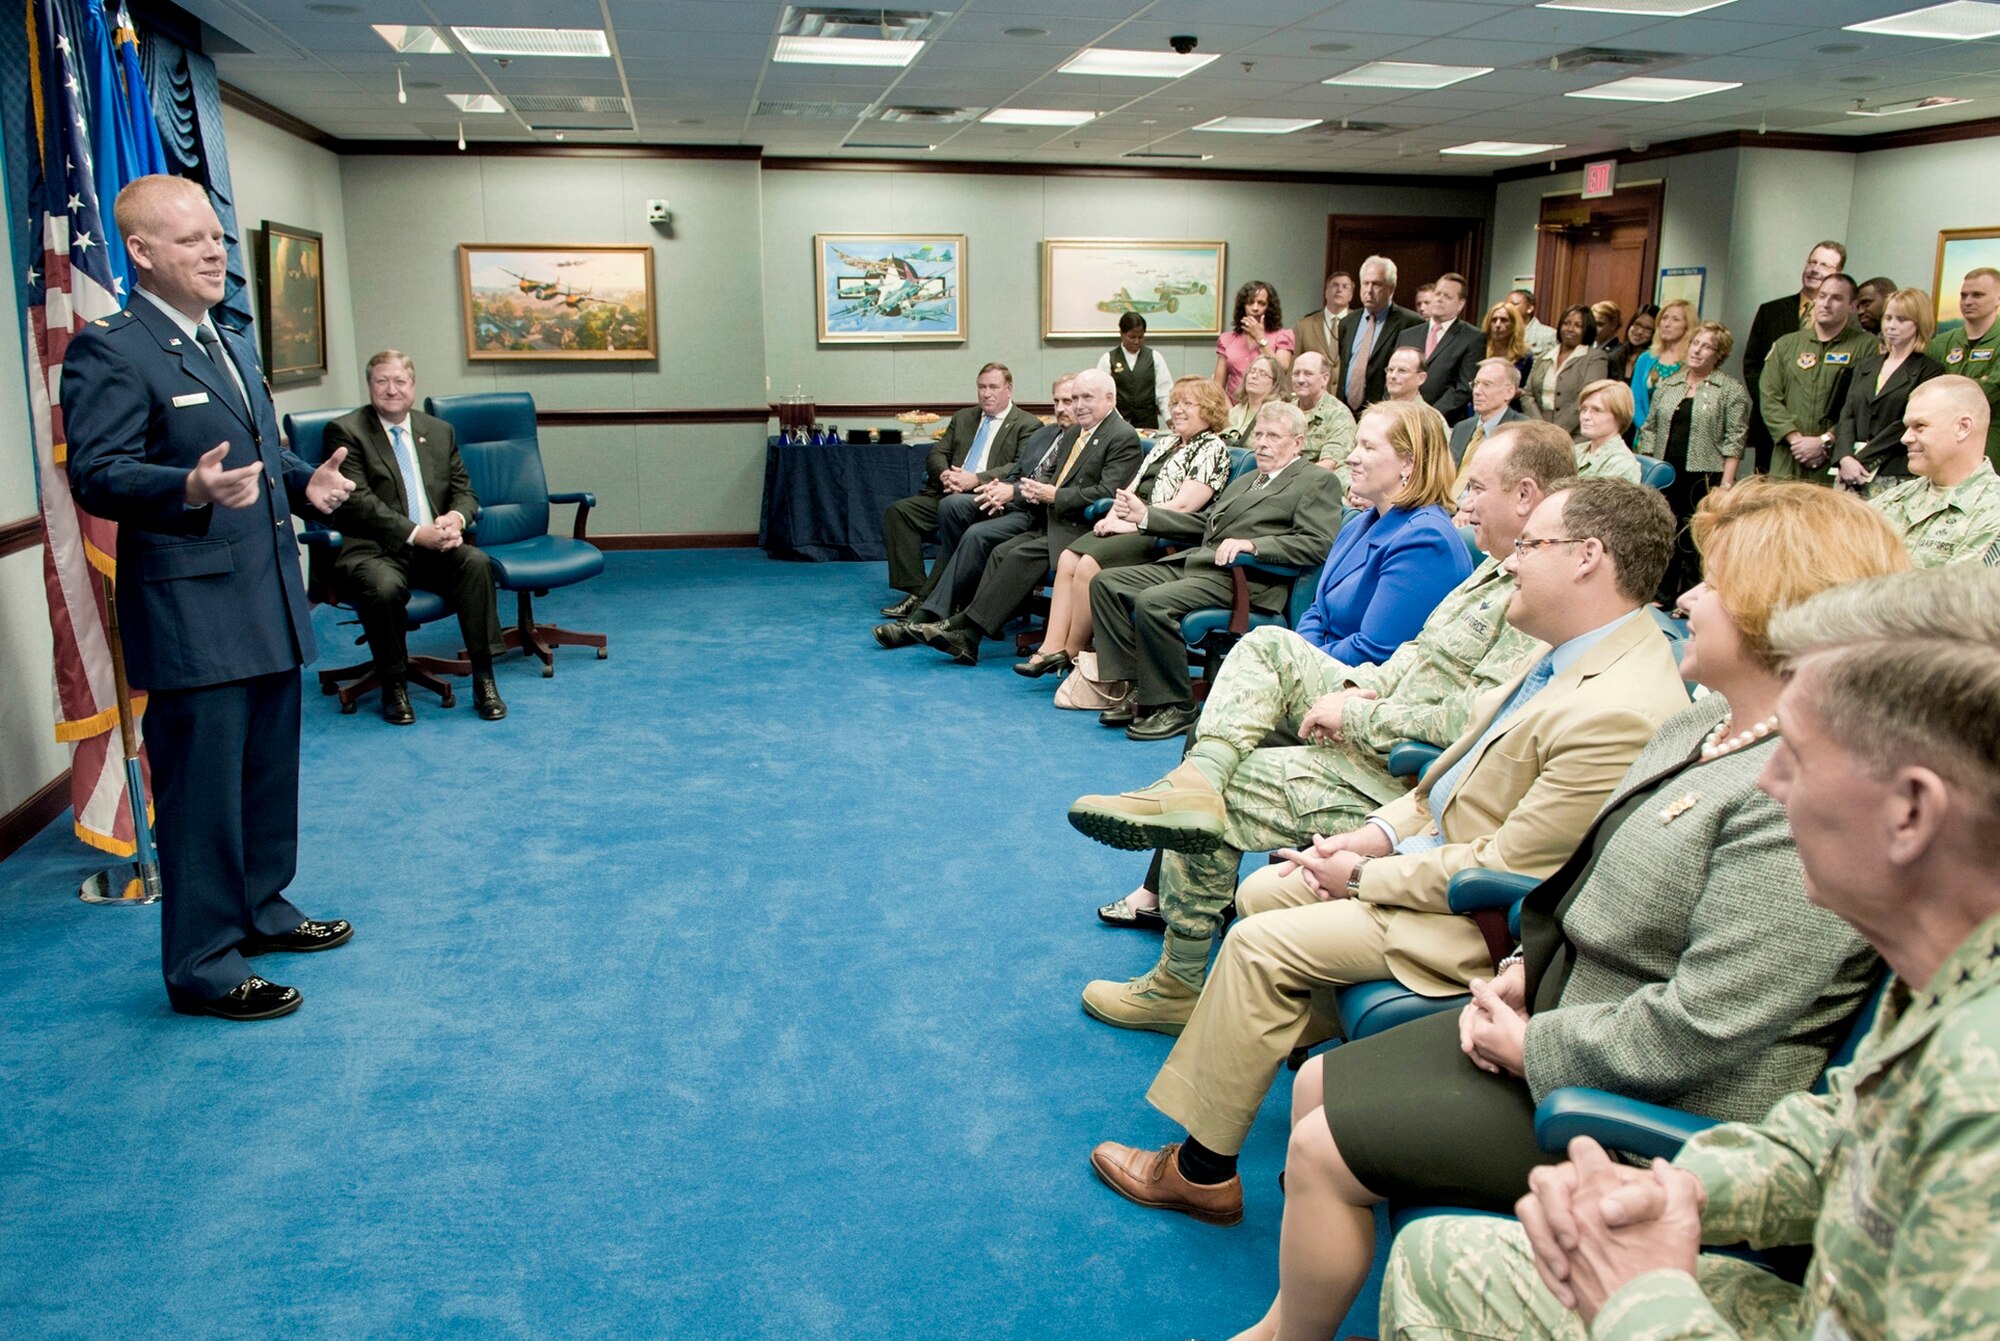 Secretary of the Air Force Michael Donley (seated second from left) looks on as Maj. Paul Sebold gives remarks after receiving the Air Force International Affairs Excellence Award for 2010 during a ceremony May 31, 2011, in the Pentagon. Established in 2008, the annual award recognizes the Air Force member who is judged to most effectively build, sustain, expand and guide enduring international relationships. Major Sebold is assigned to Headquarters U.S. Air Forces in Europe at Ramstein Air Base, Germany, as a political
military affairs strategist and country desk officer. (U.S. Air Force photo/Jim Varhegyi)
